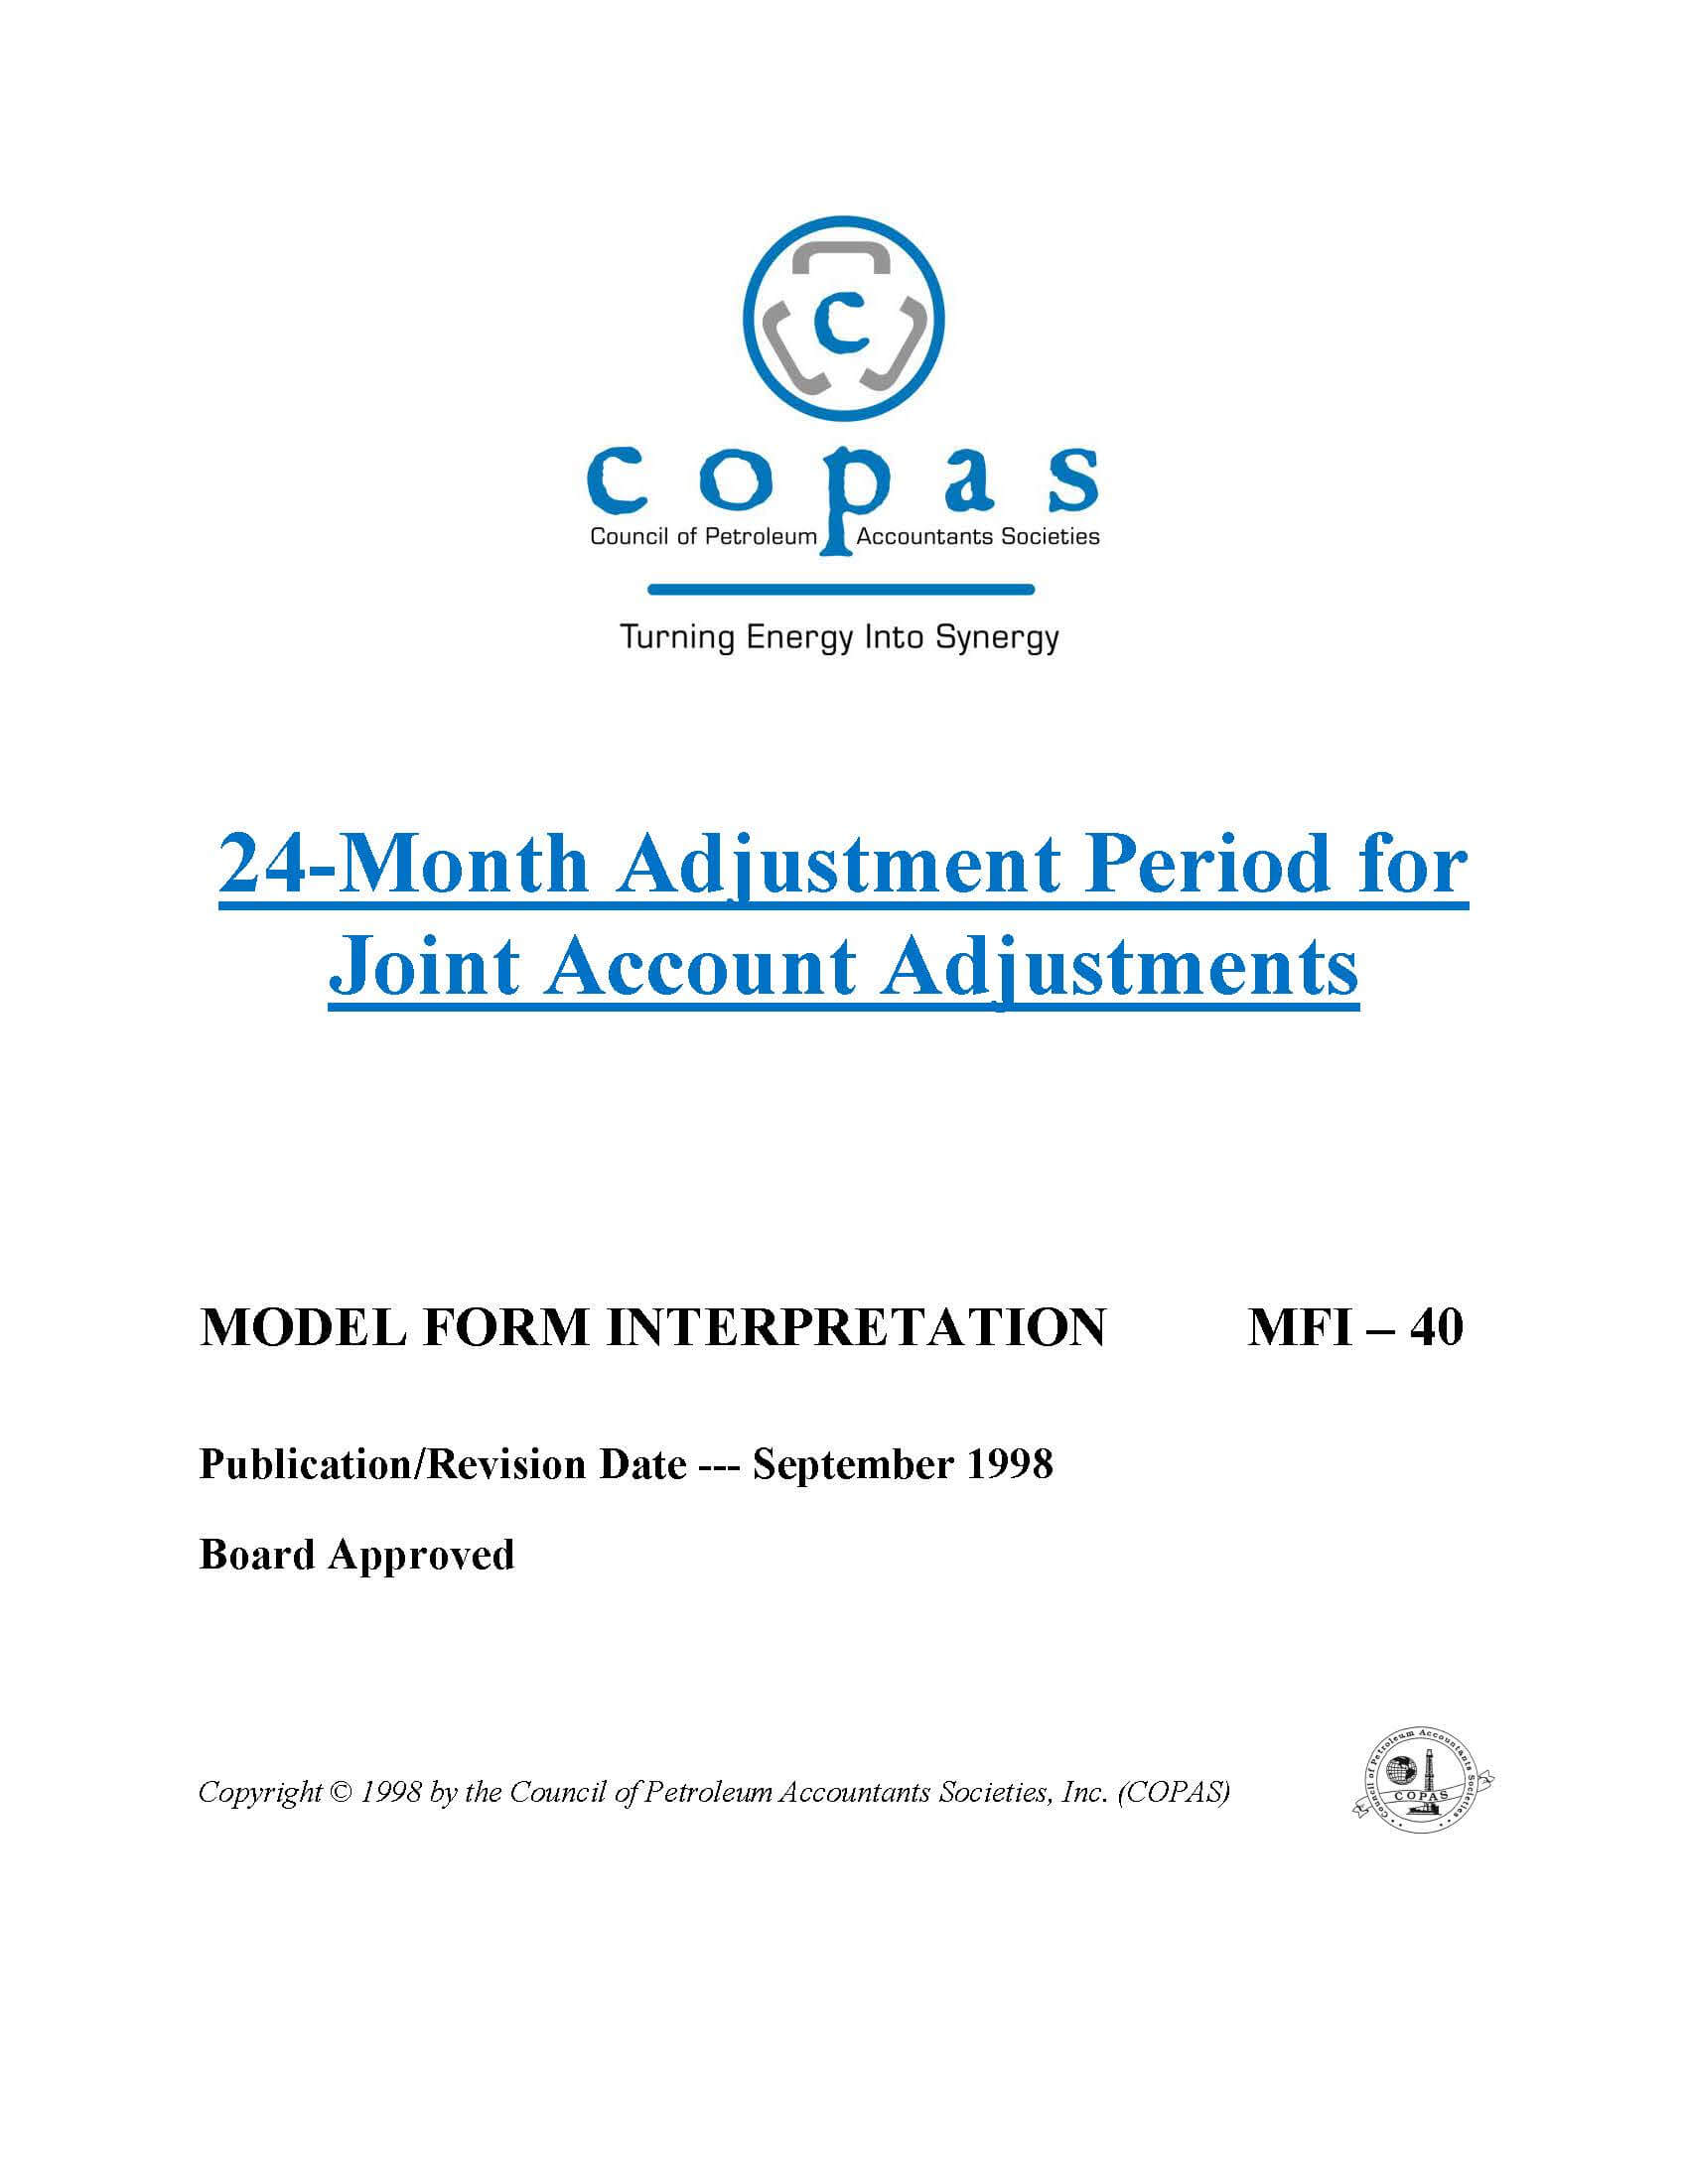 MFI-40 24 Month Adjustment Period for Joint Account Adjustments - products MFI 40 24 Month Accounting Adjustment Period Joint Account Adjustments - Council of Petroleum Accountants Societies